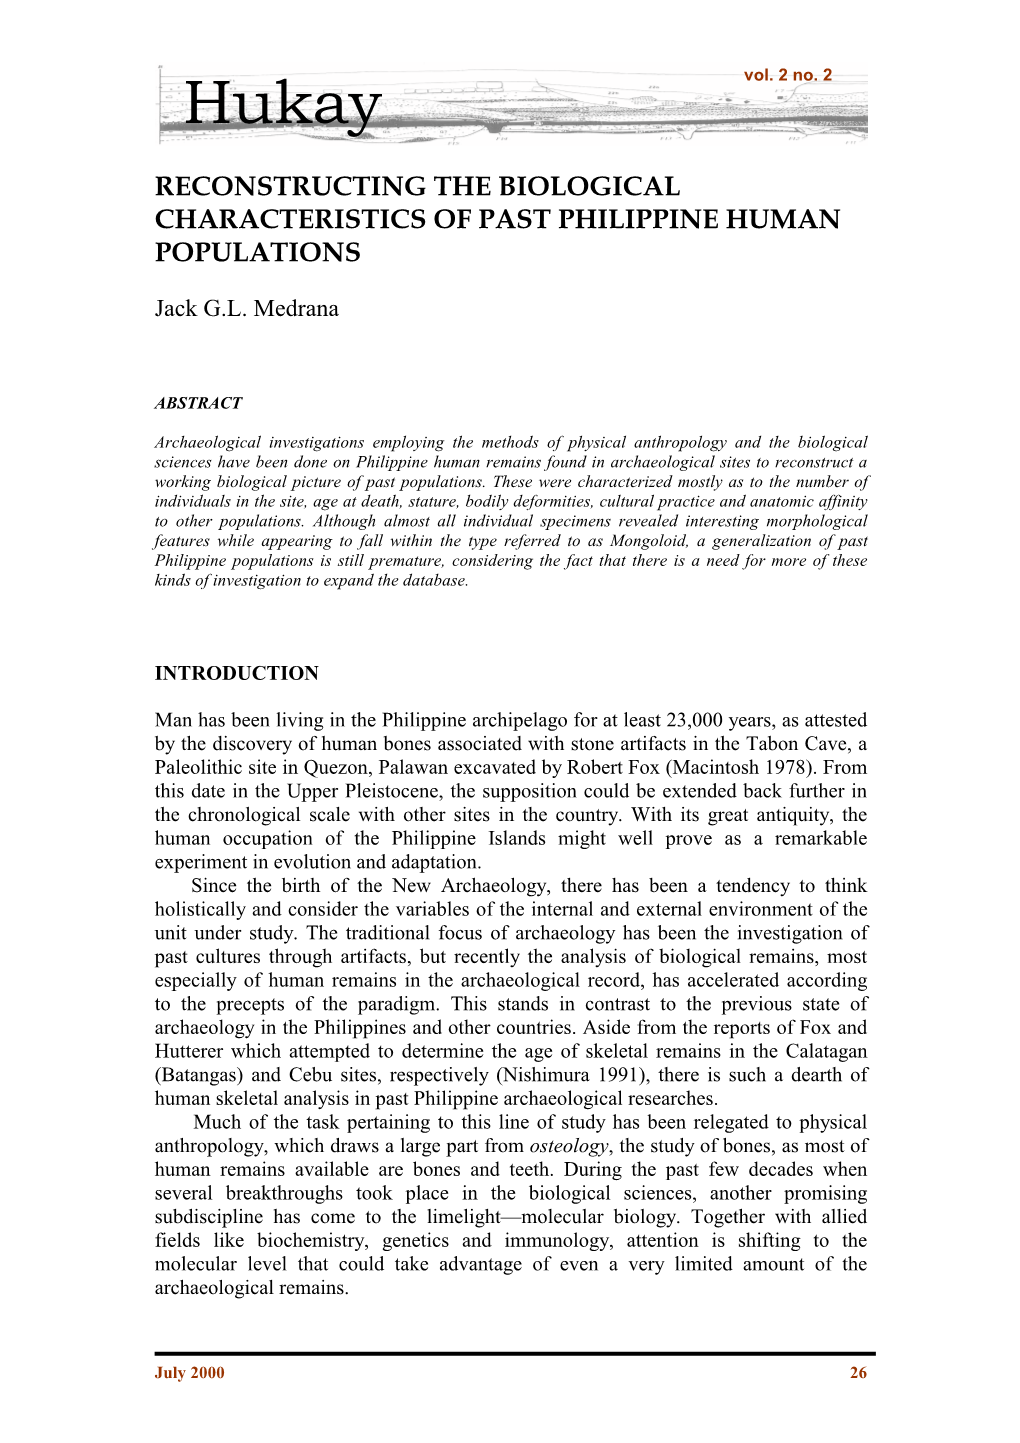 Reconstructing the Biological Characteristics of Past Philippine Human Populations